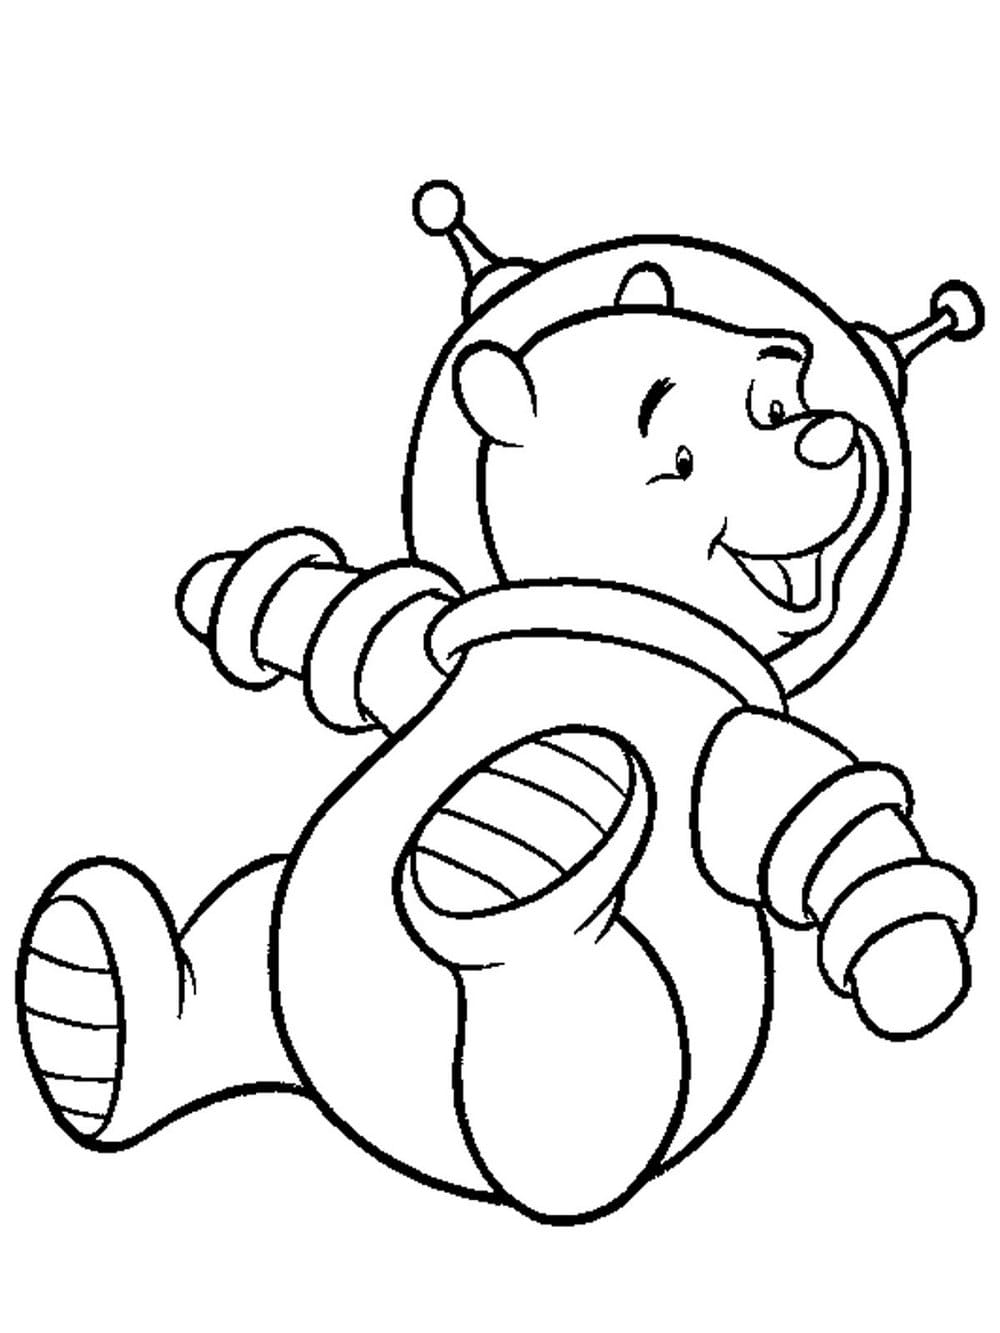 Space Coloring pages. 100 Printable Colorings pages | WONDER DAY